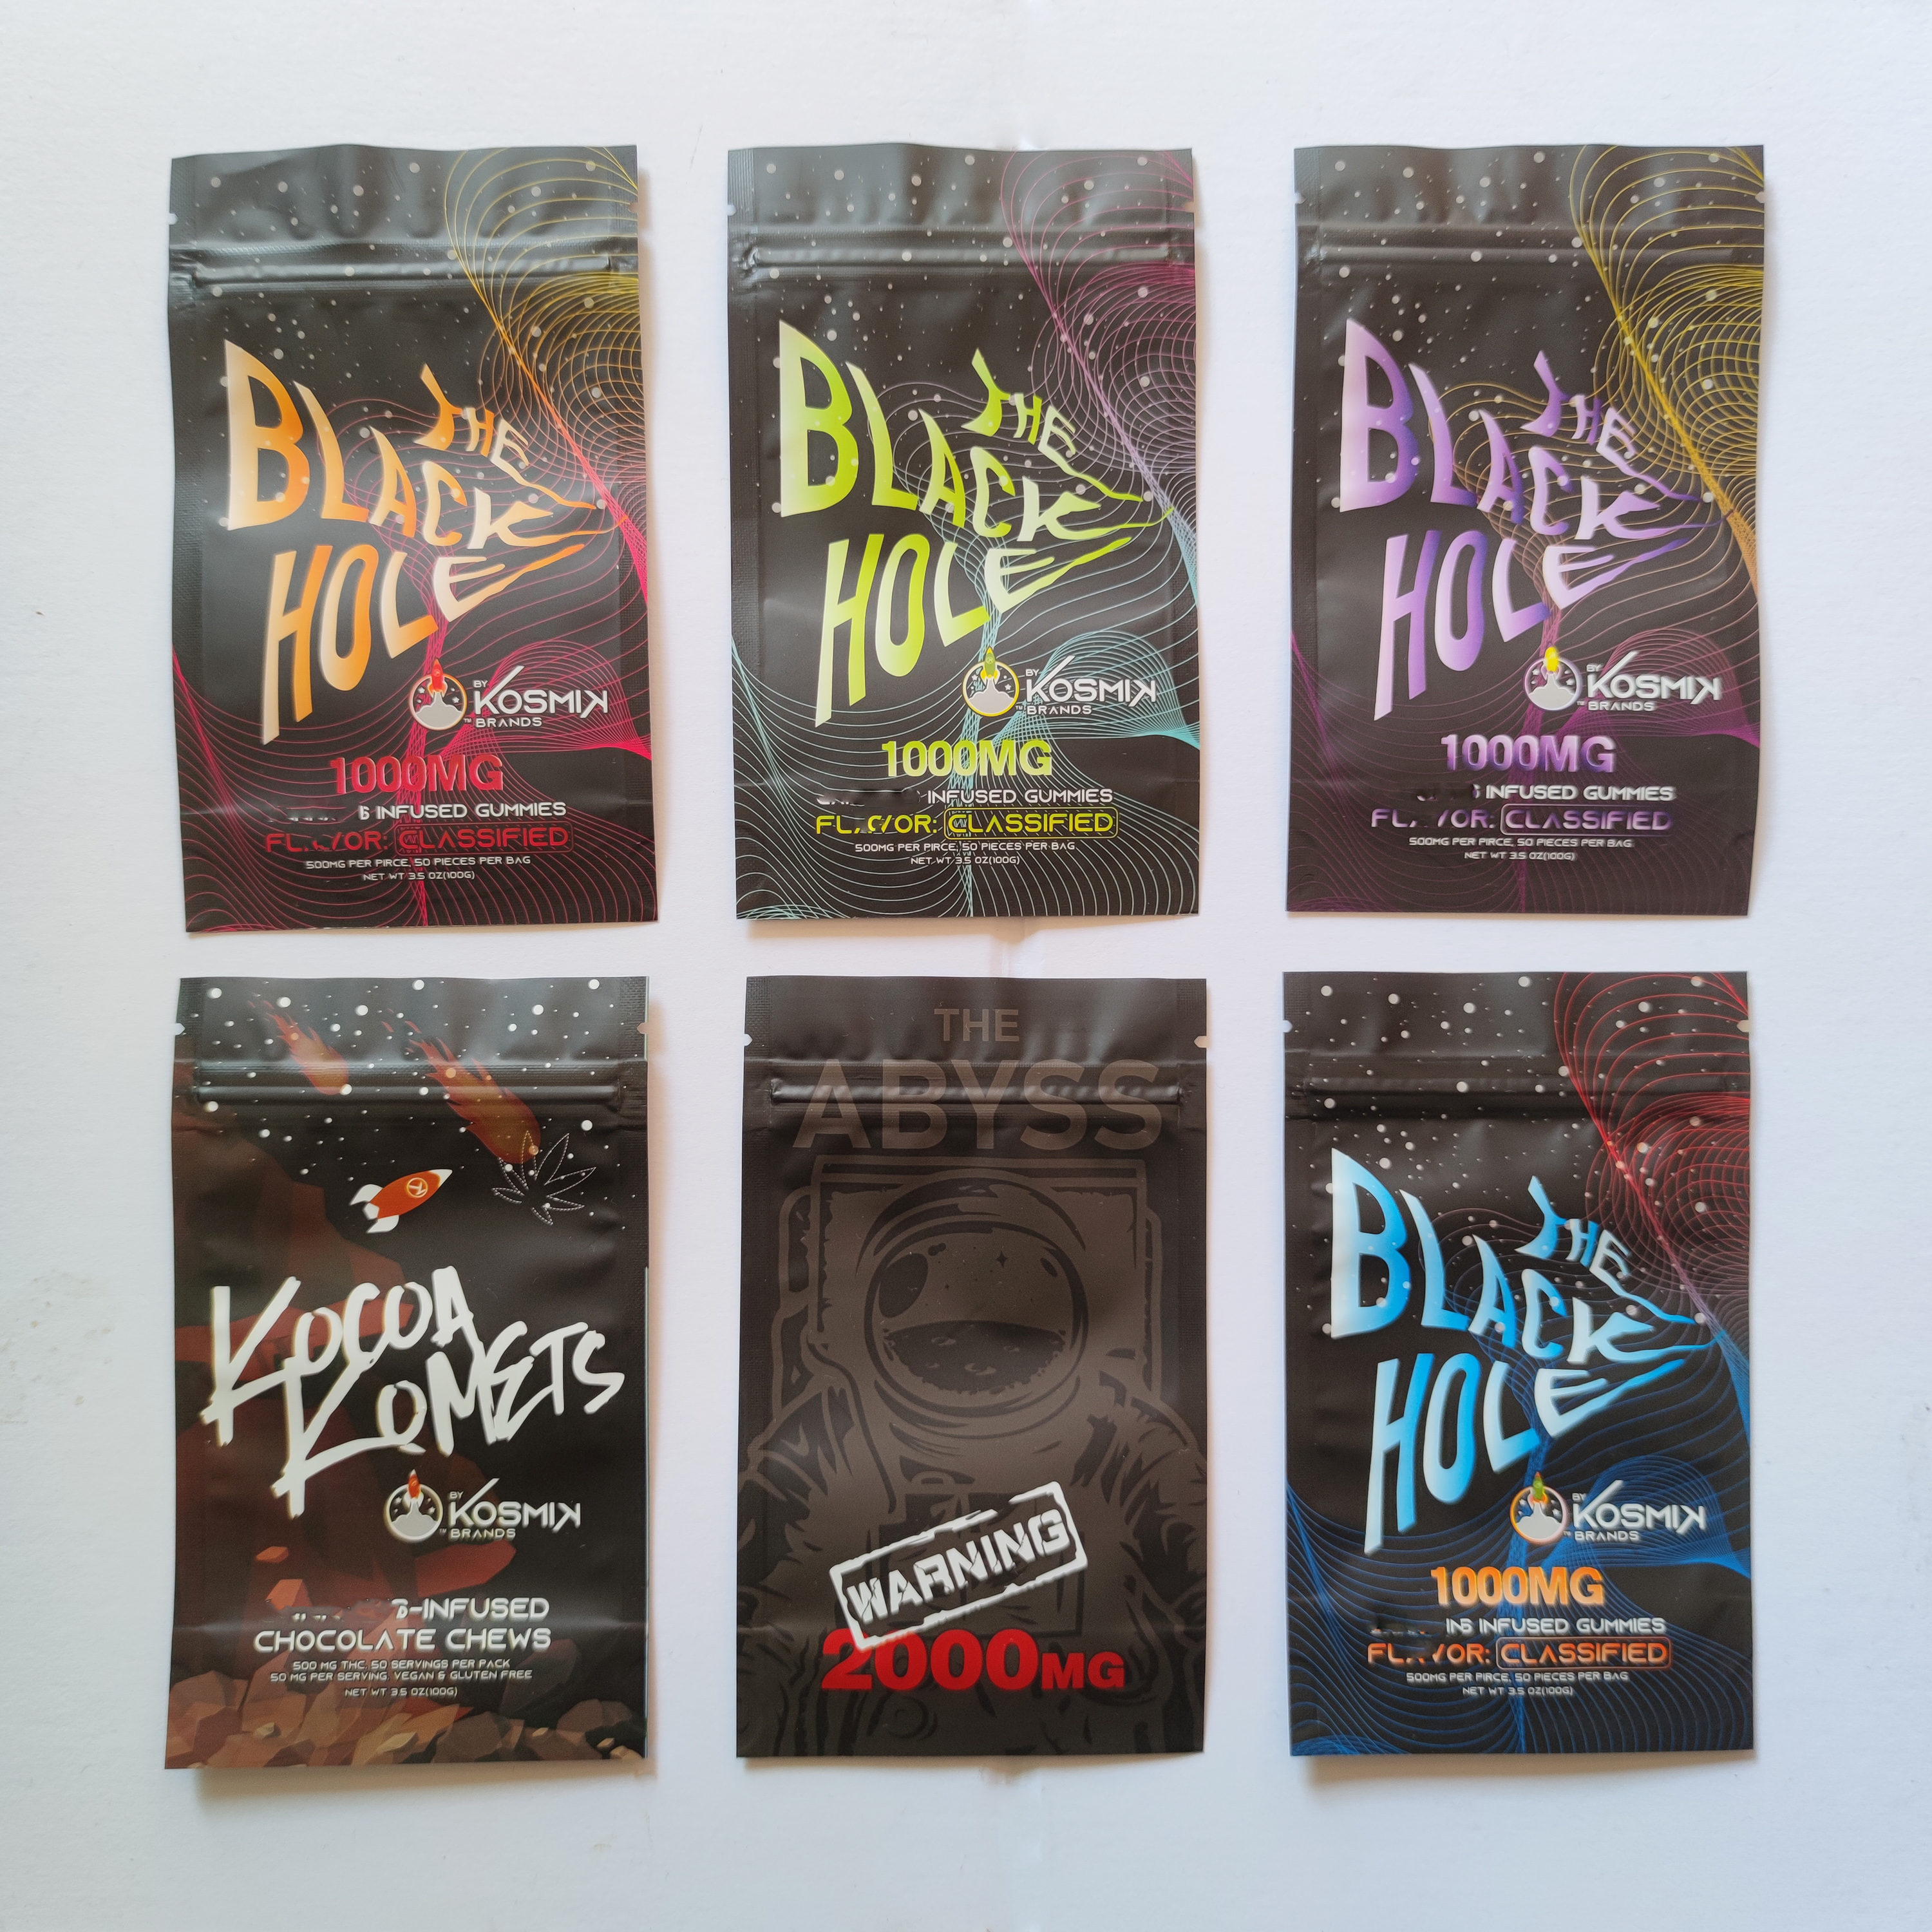 

The black hole kosmik brands sour fruit gummies packing bags 1000mg 500mg servings per pack per 3.5oz resealable mylar Edibles Infused Gummy zipper bag Newest